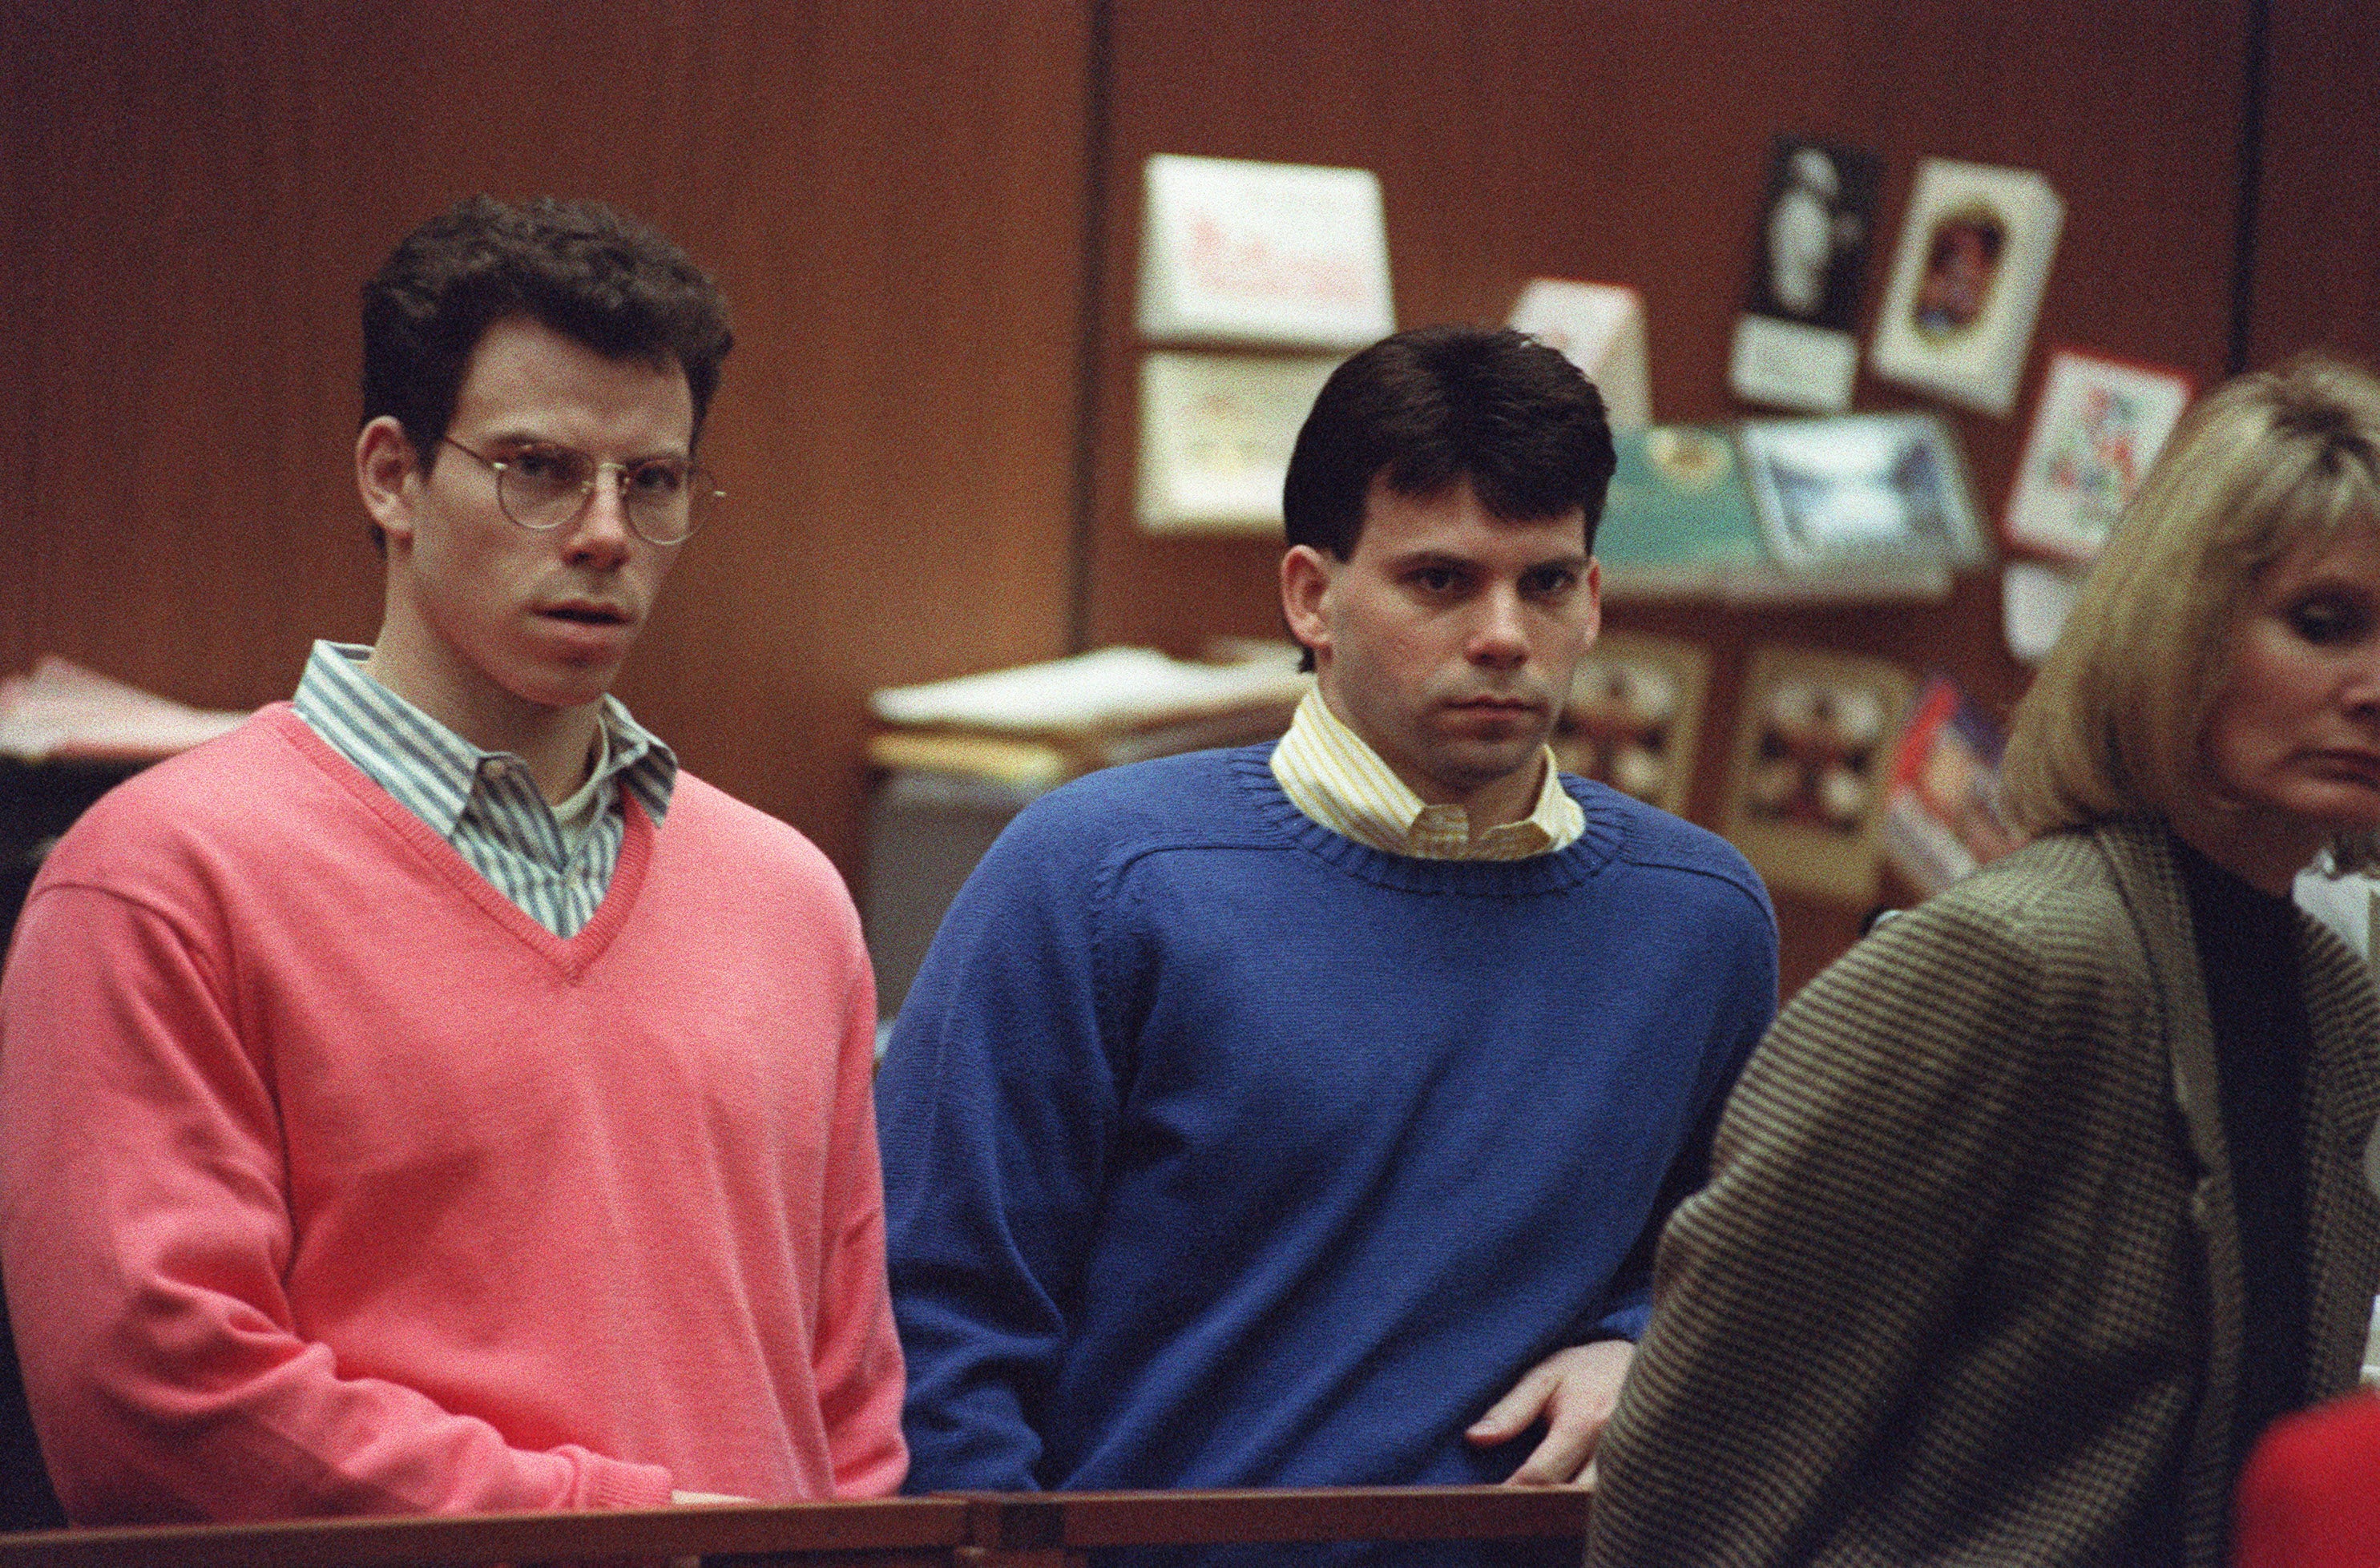 Erik Menendez (L) and his brother Lyle (R) listen during a pre-trial hearing, on December 29, 1992 in Los Angeles after the two pleaded innocent in the August 1989 shotgun deaths of their wealthy parents, Jose and Mary Louise Menendez of Beverly Hills, California